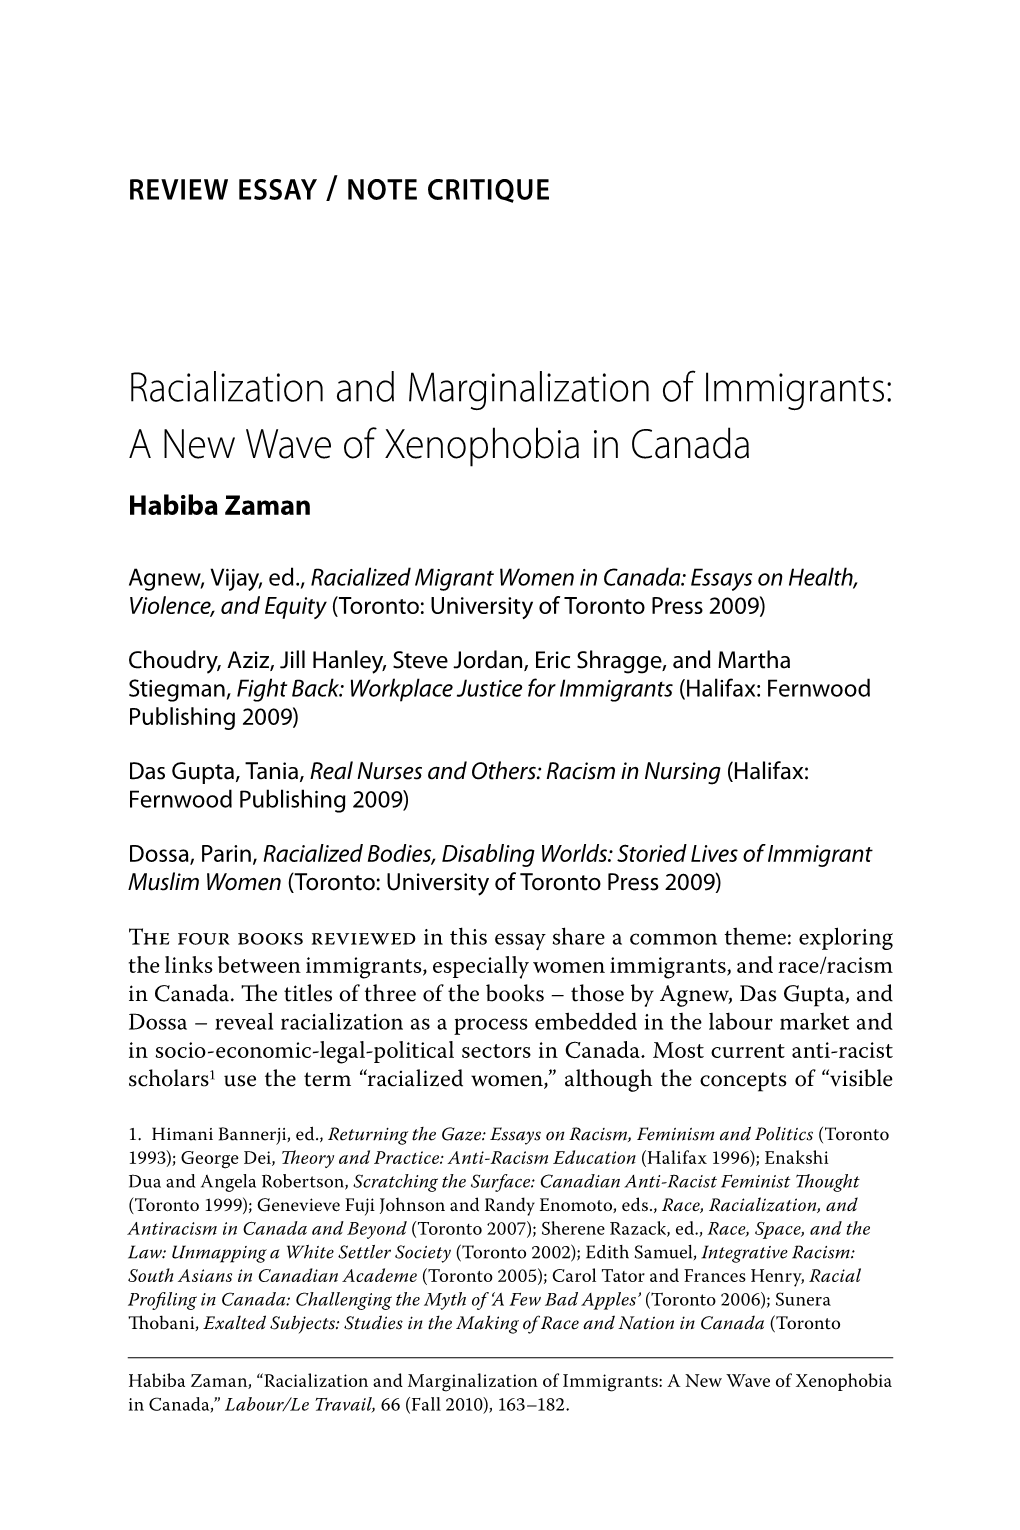 Racialization and Marginalization of Immigrants: a New Wave of Xenophobia in Canada Habiba Zaman